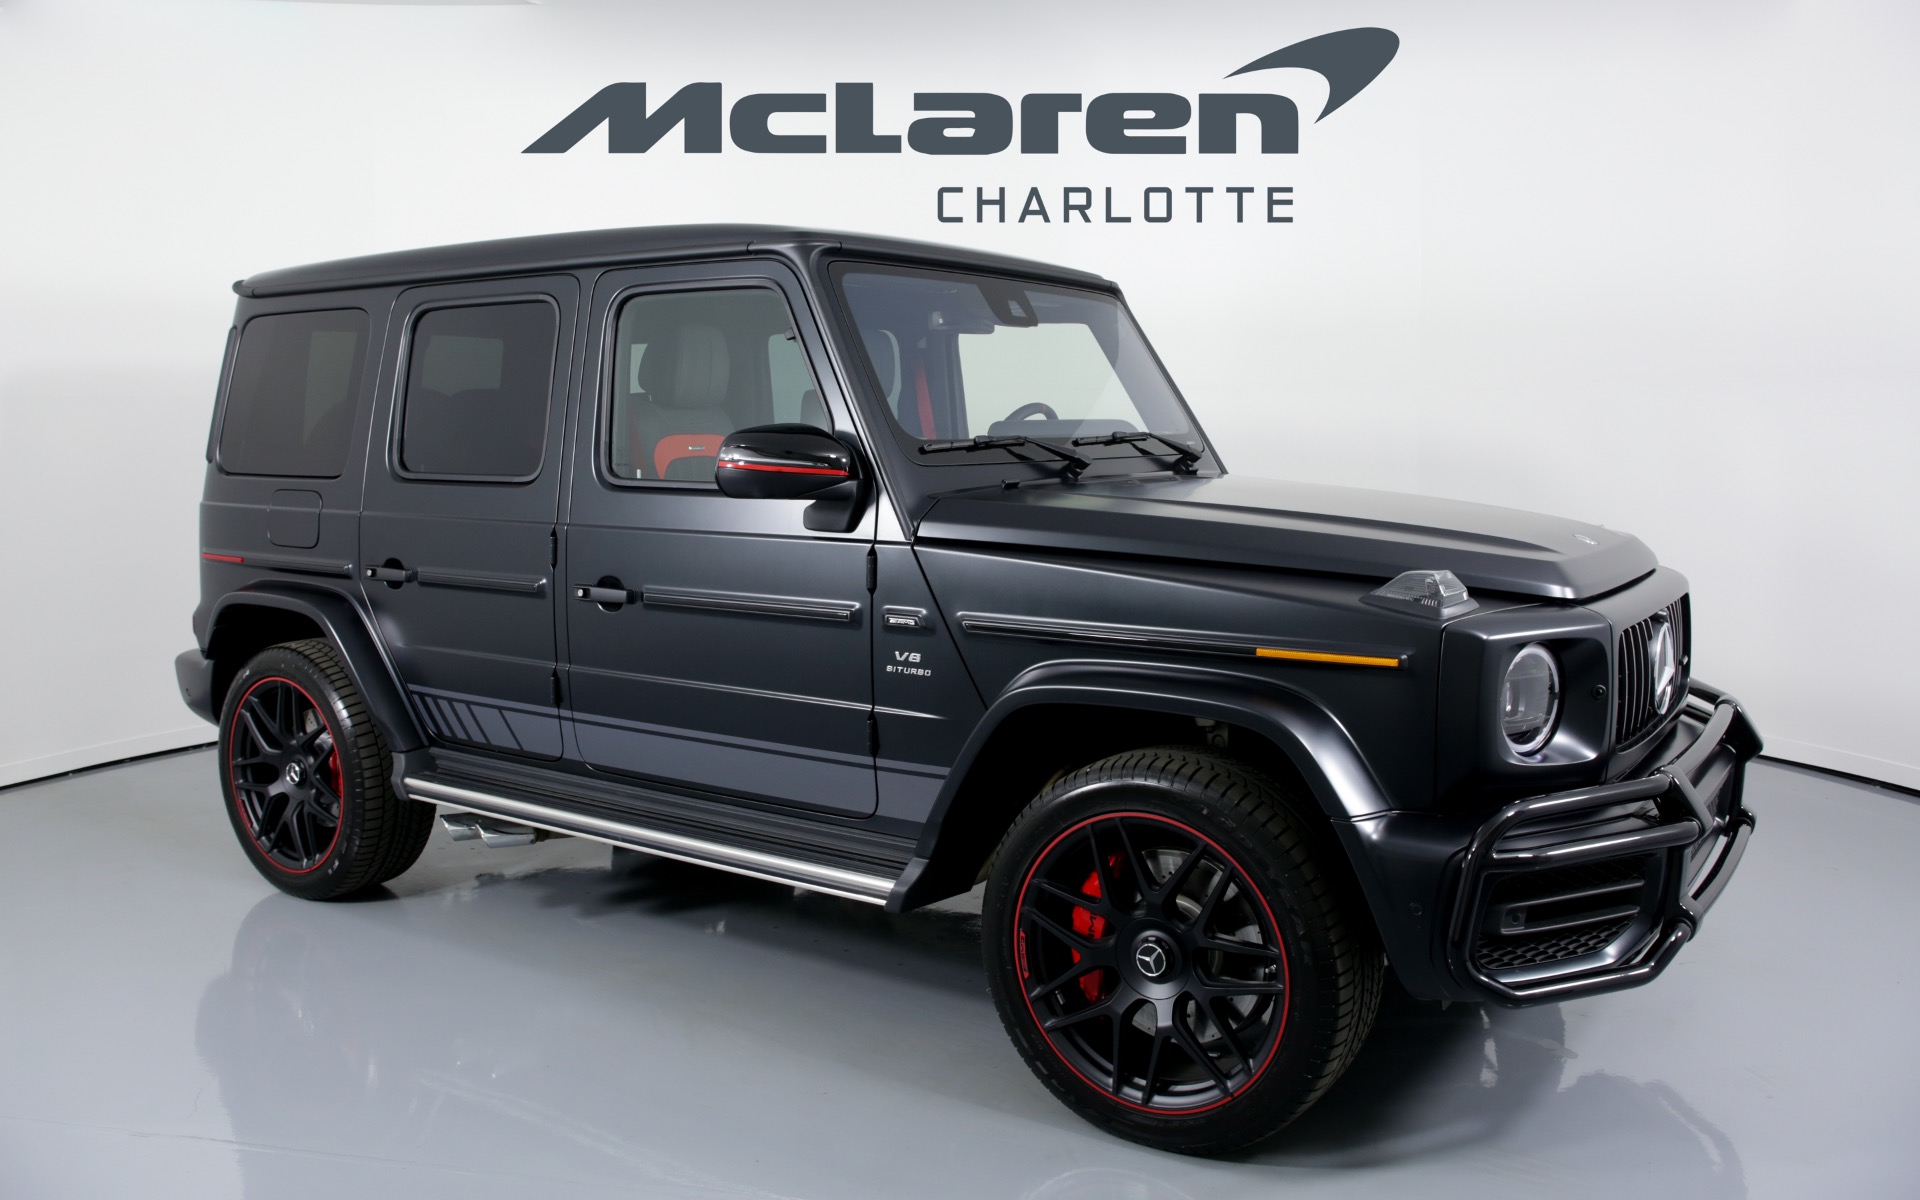 Used 19 Mercedes Benz G Class Amg G 63 For Sale 249 996 Mclaren Charlotte Stock